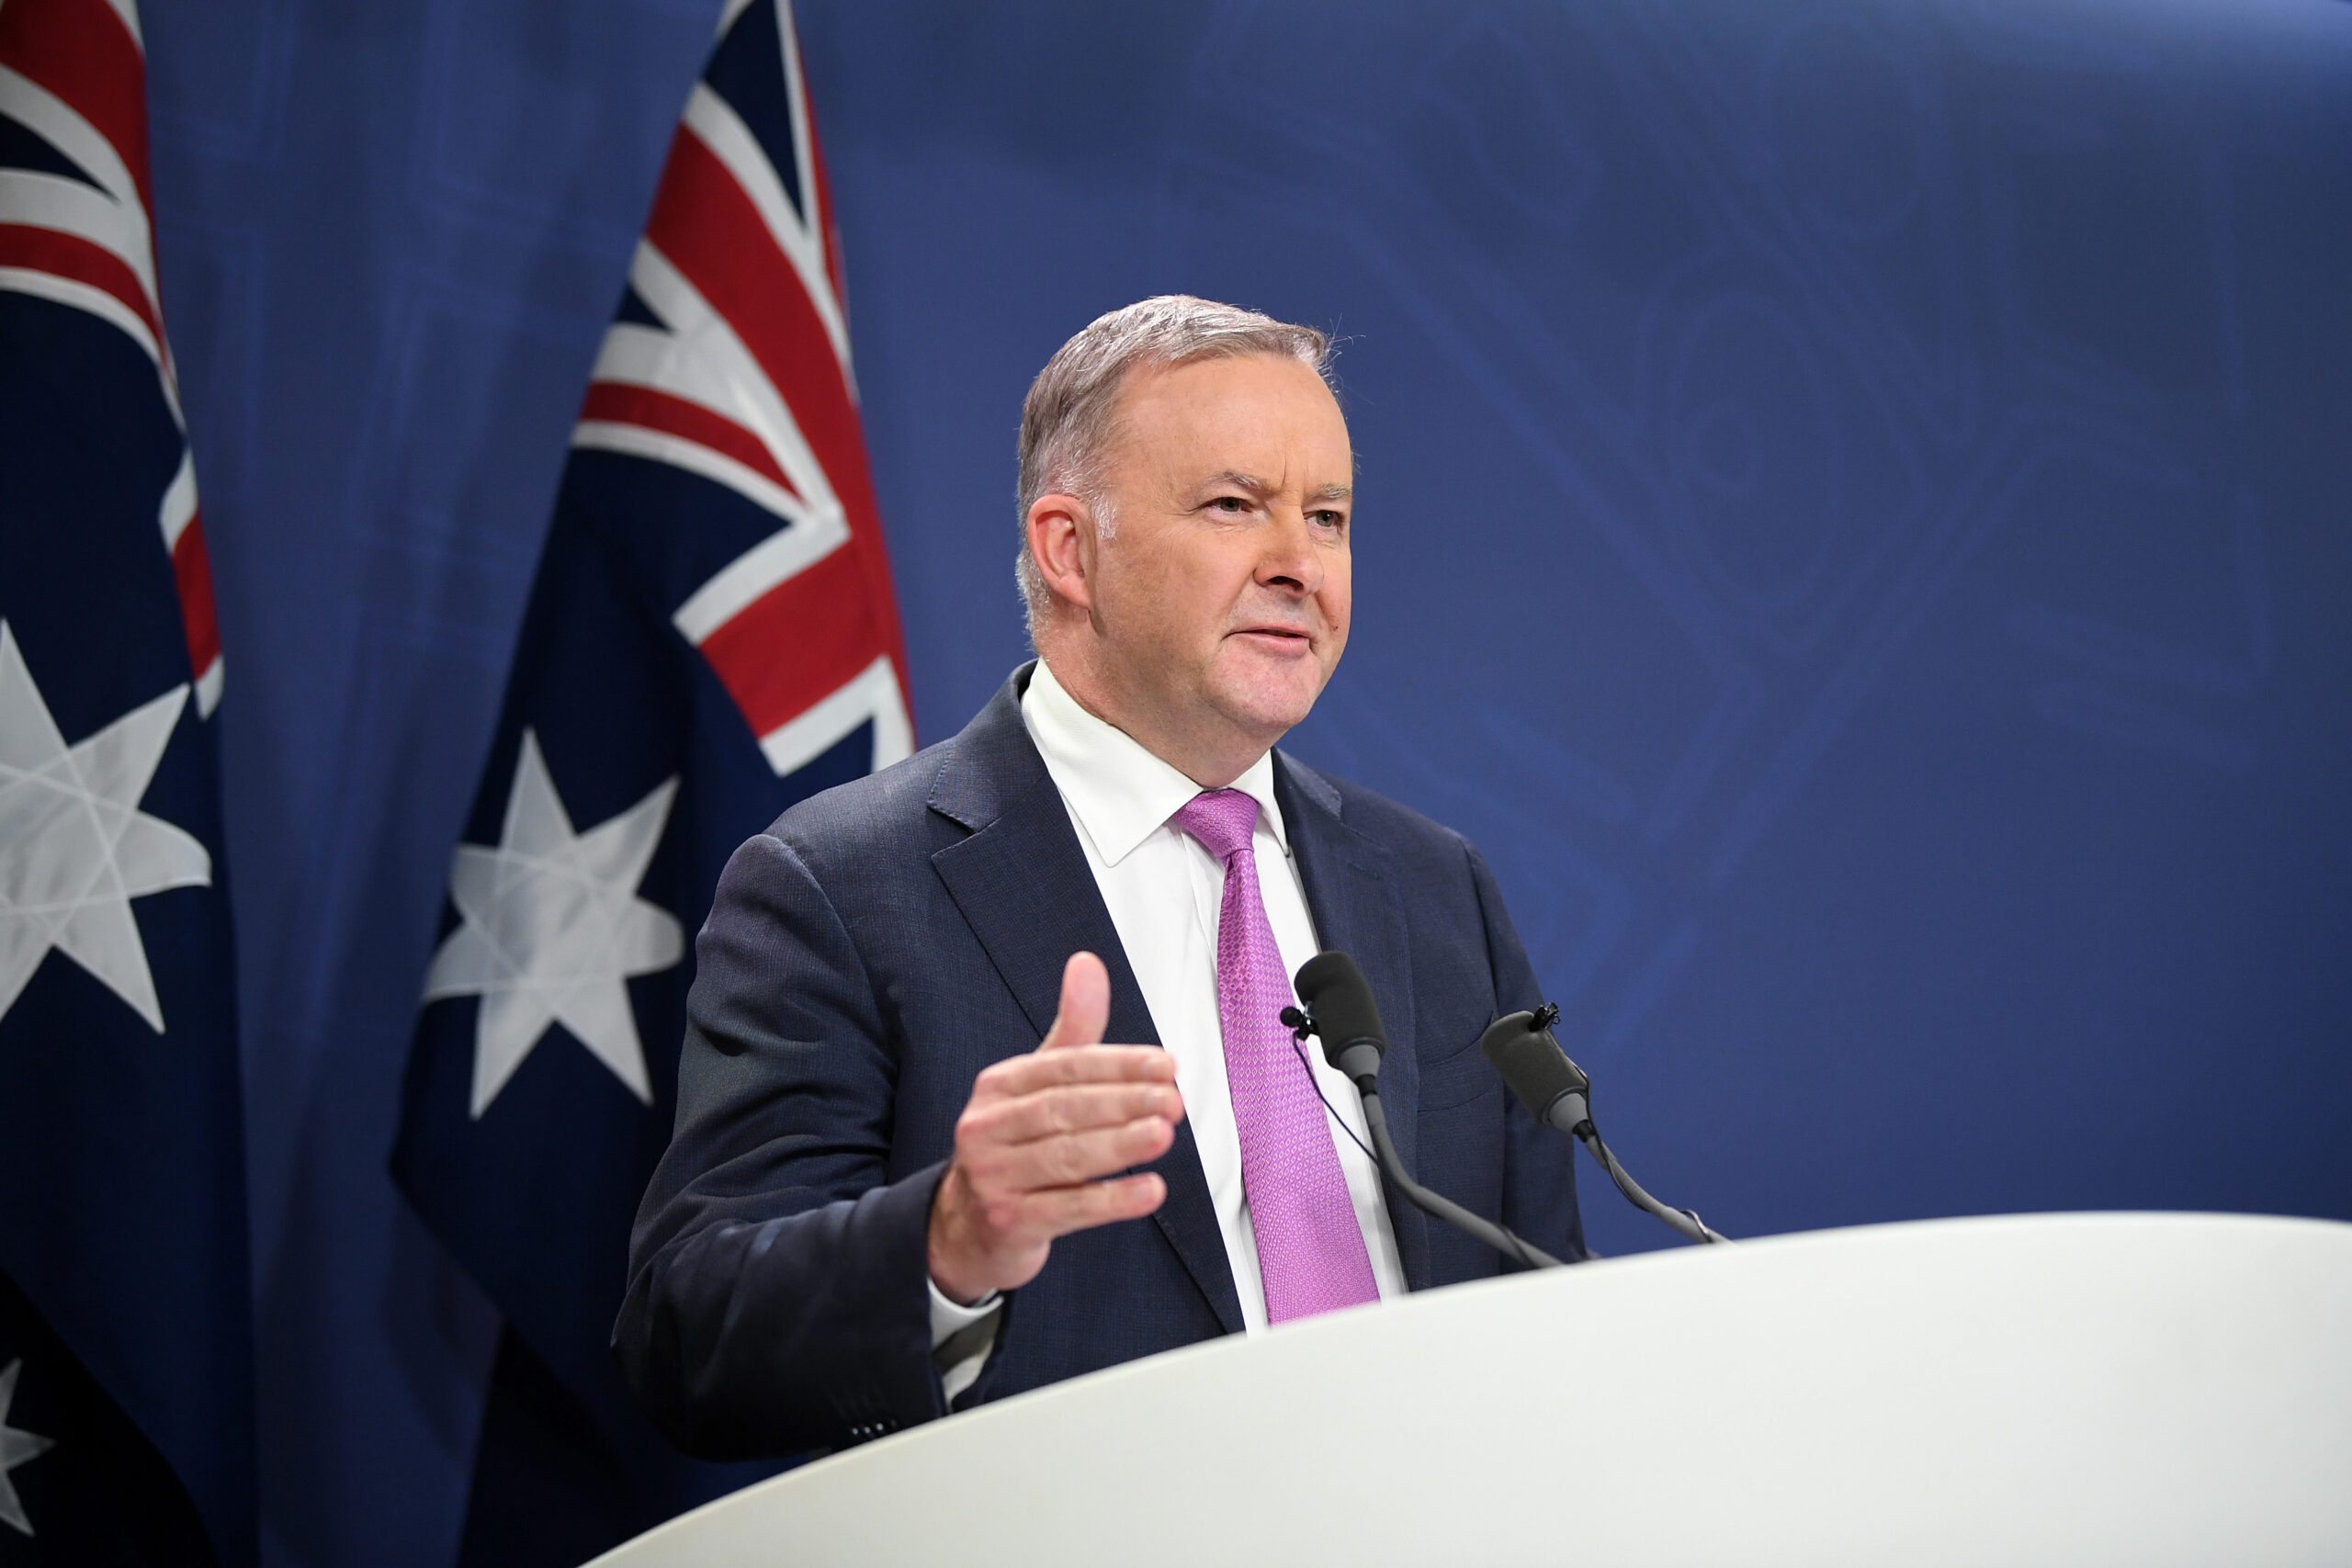 Anthony Albanese with Australian flgas in background